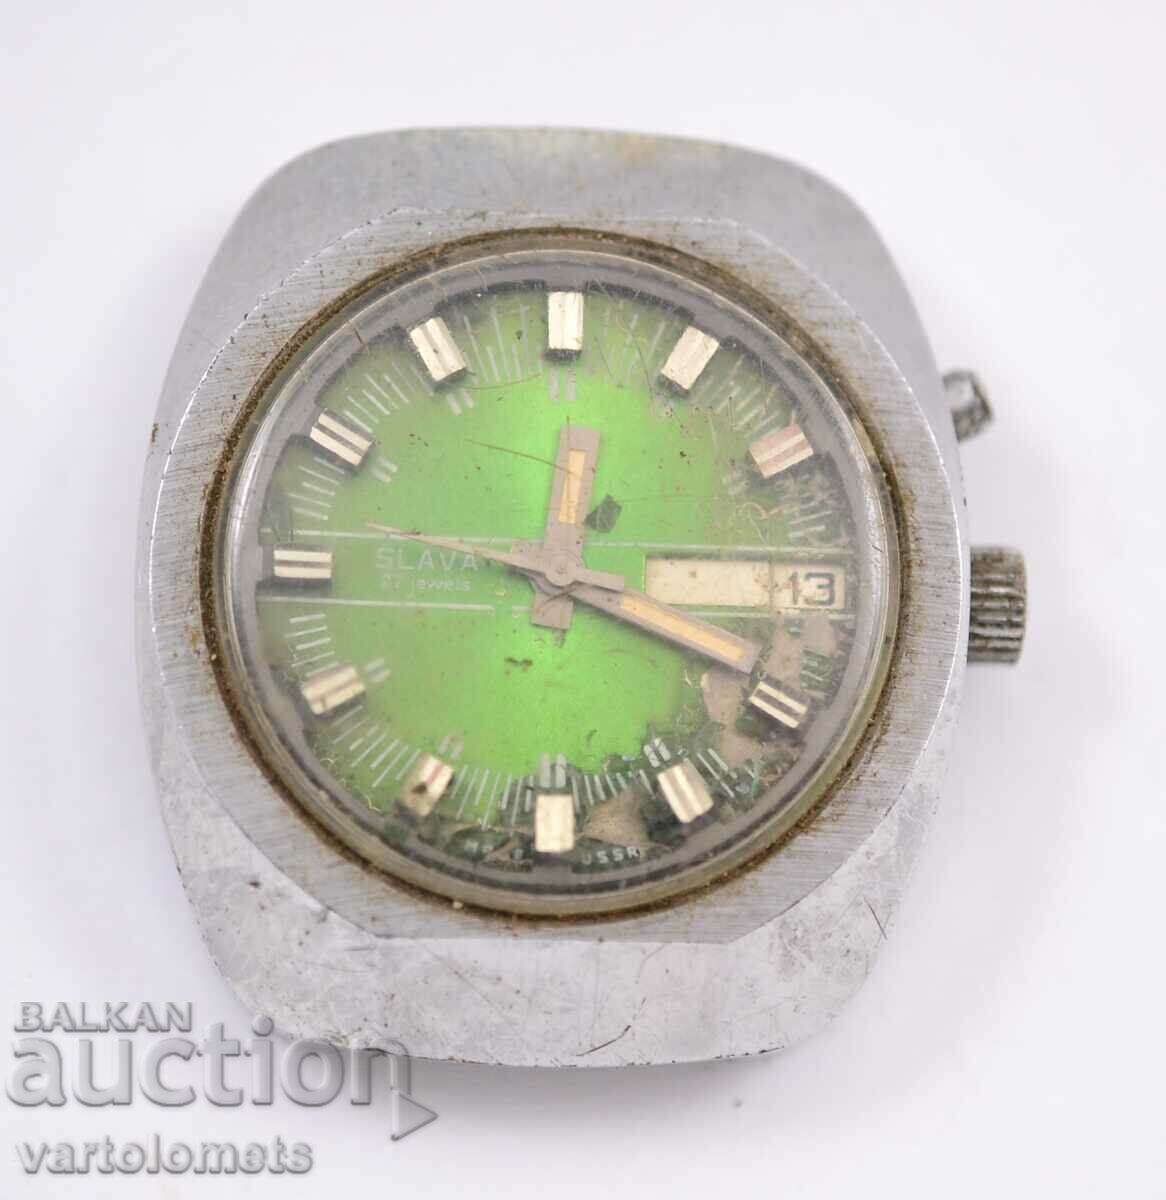 SLAVA AUTOMATIC - does not work